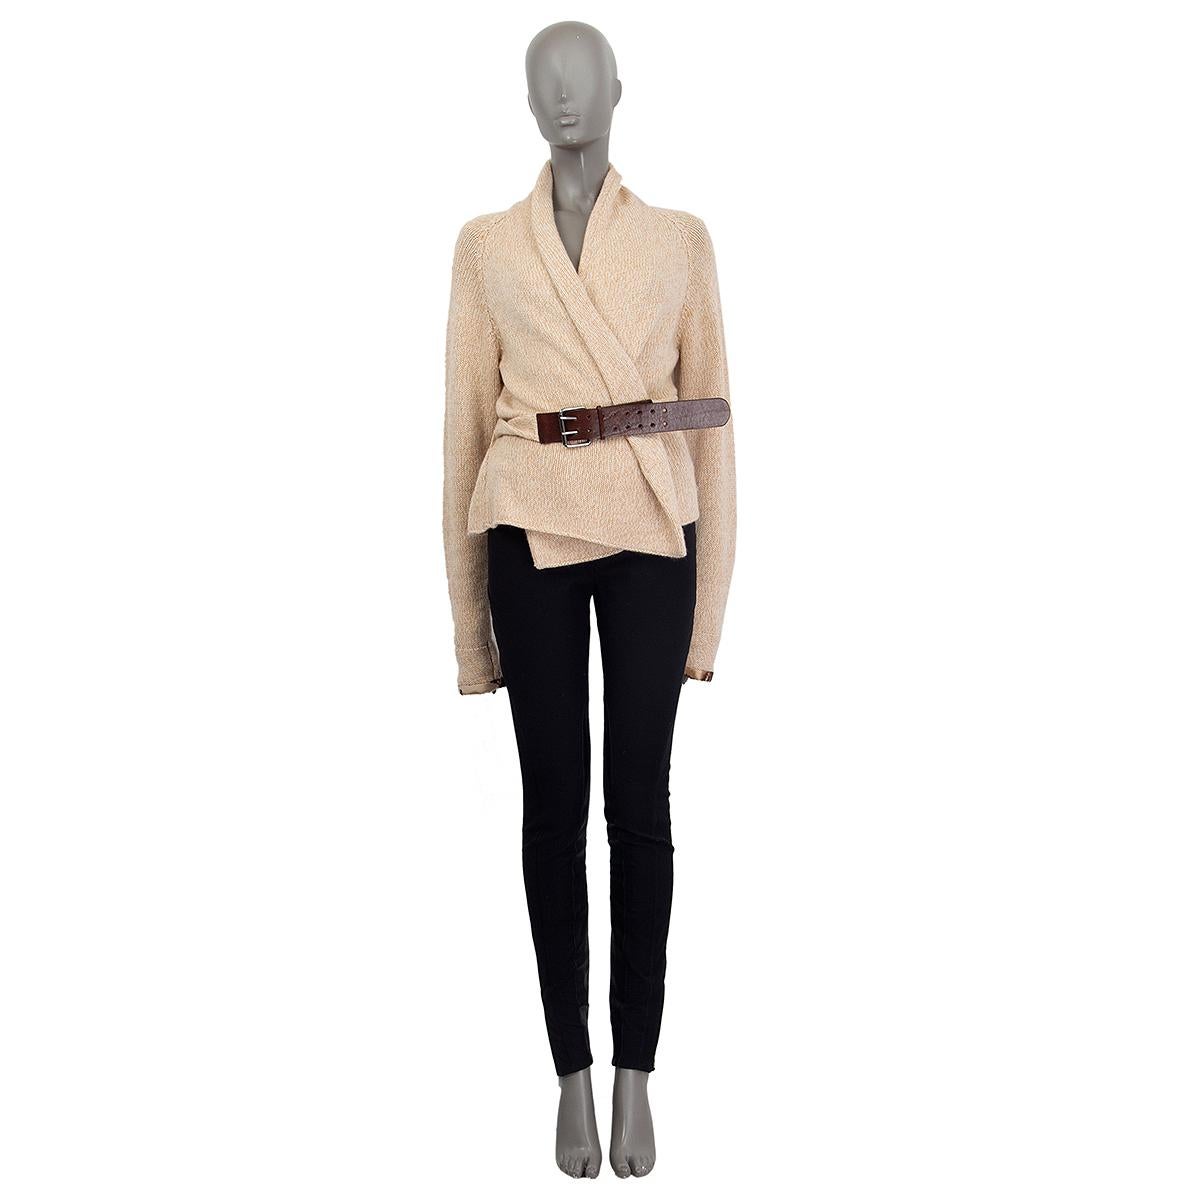 100% authentic Brunello Cucinelli shawl collard belted cardigan in heather beige cashmere (100%) with leopard satin trim on the cuffs and dark brown leather details on the belt. Has been worn and is in excellent condition.

Measurements
Tag